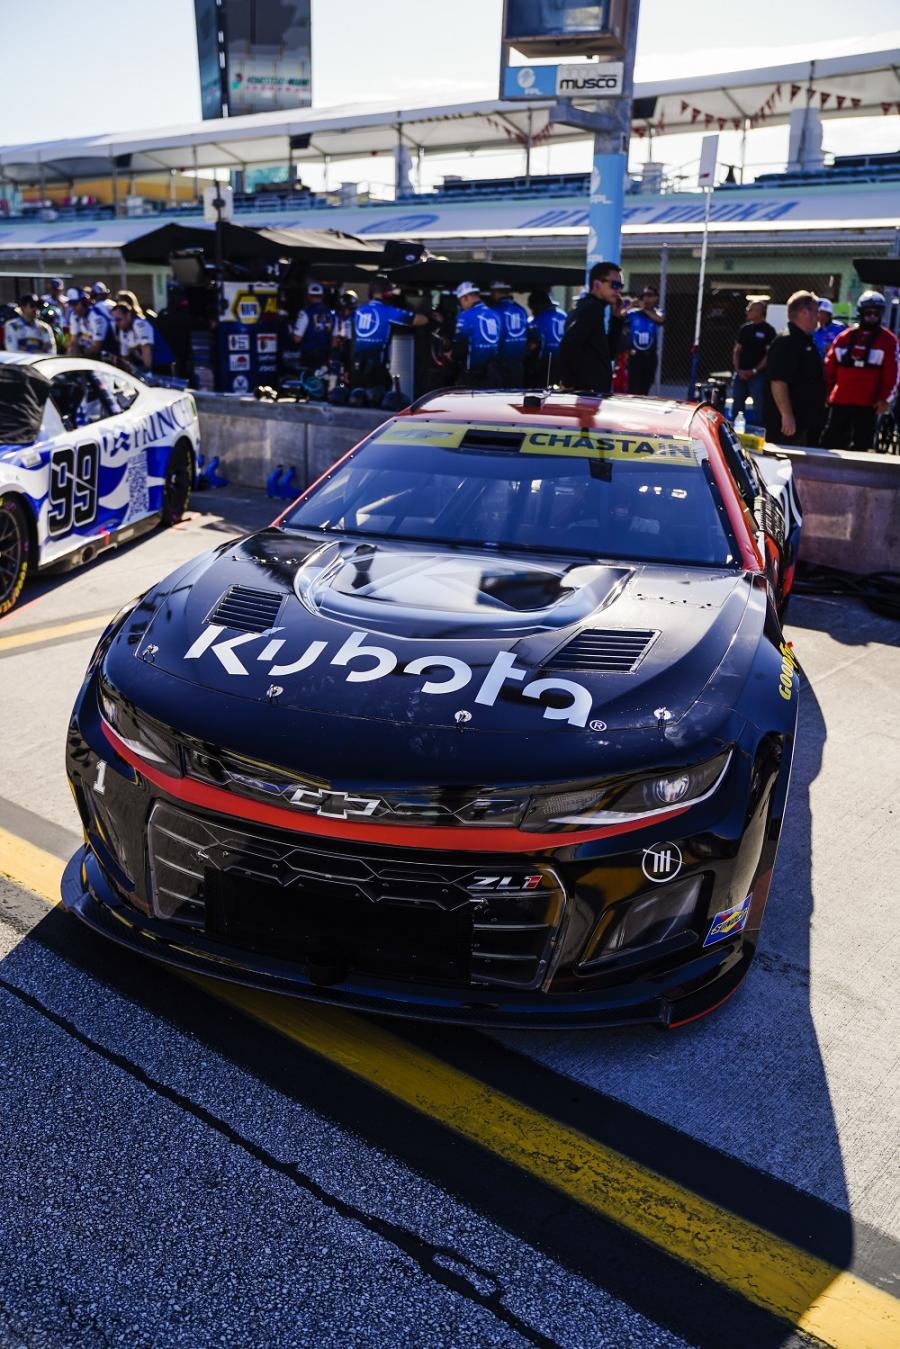 In the five races Kubota is serving as the primary sponsor of Chastain’s No. 1 Kubota Chevrolet, a $10,000 donation will be made to the Farmer Veteran Coalition for a top-10 finish.